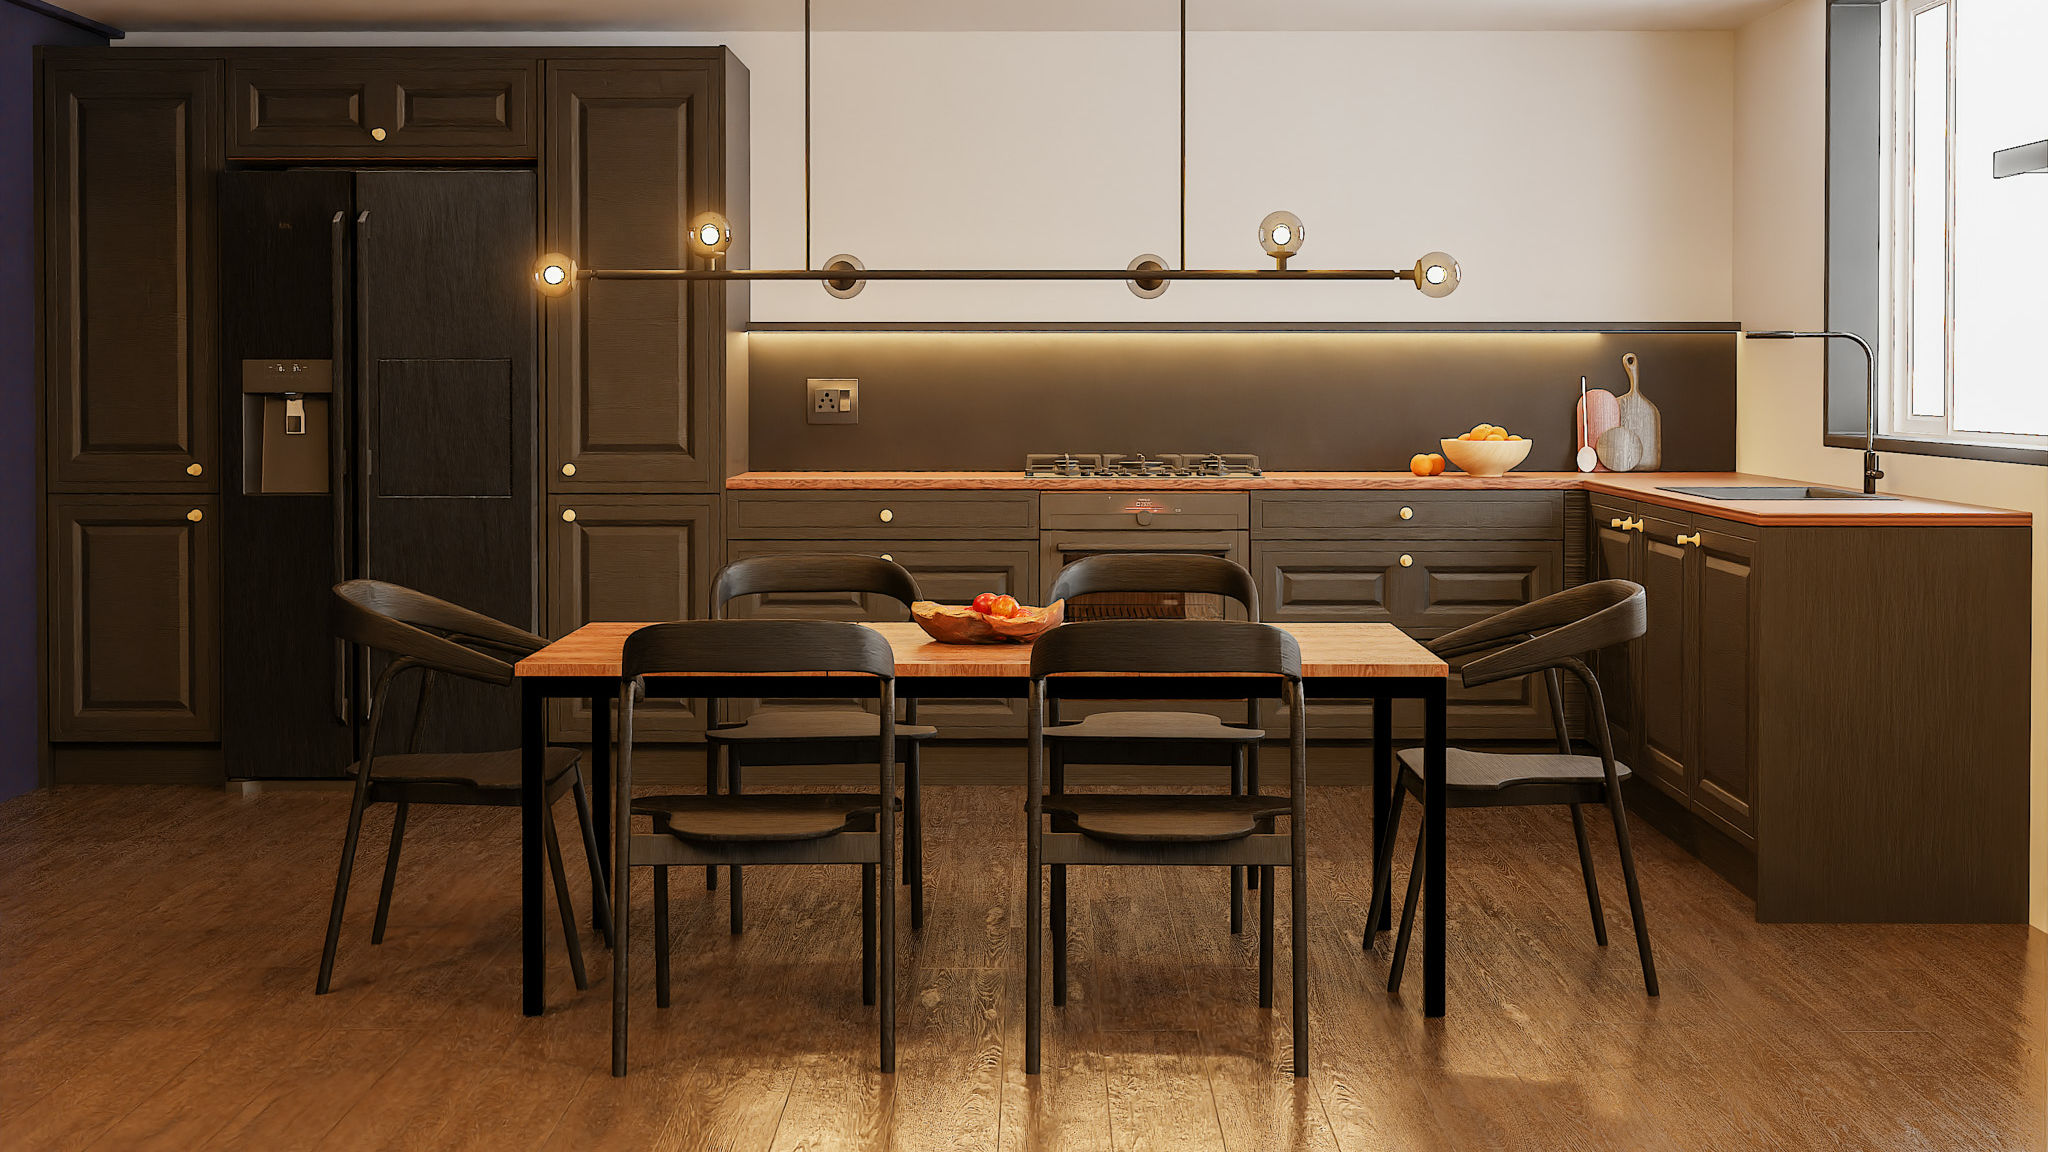 Mock Inframe Jacobsen Cannon Black kitchens showcasing a bespoke design with a deep black finish for dramatic elegance